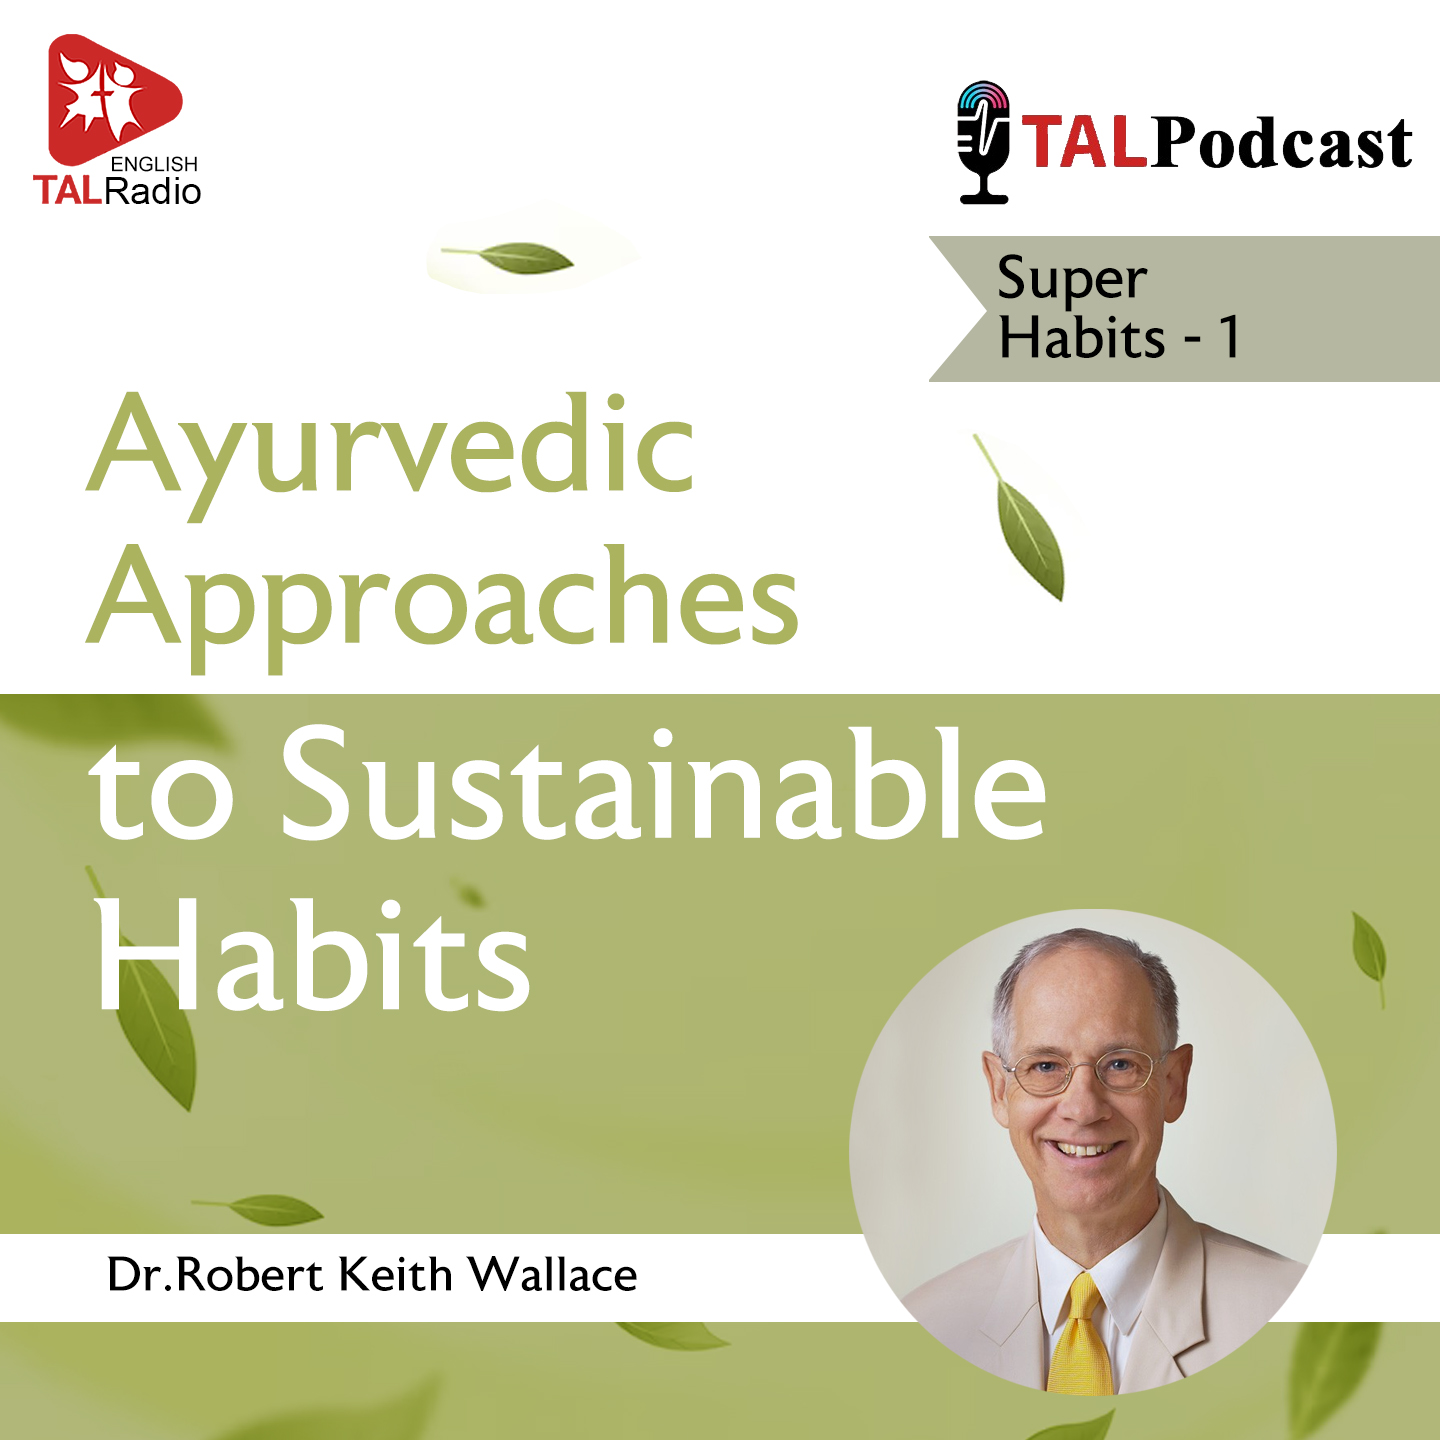 Ayurvedic Approches to Sustainable Habits | Super Habits - 1